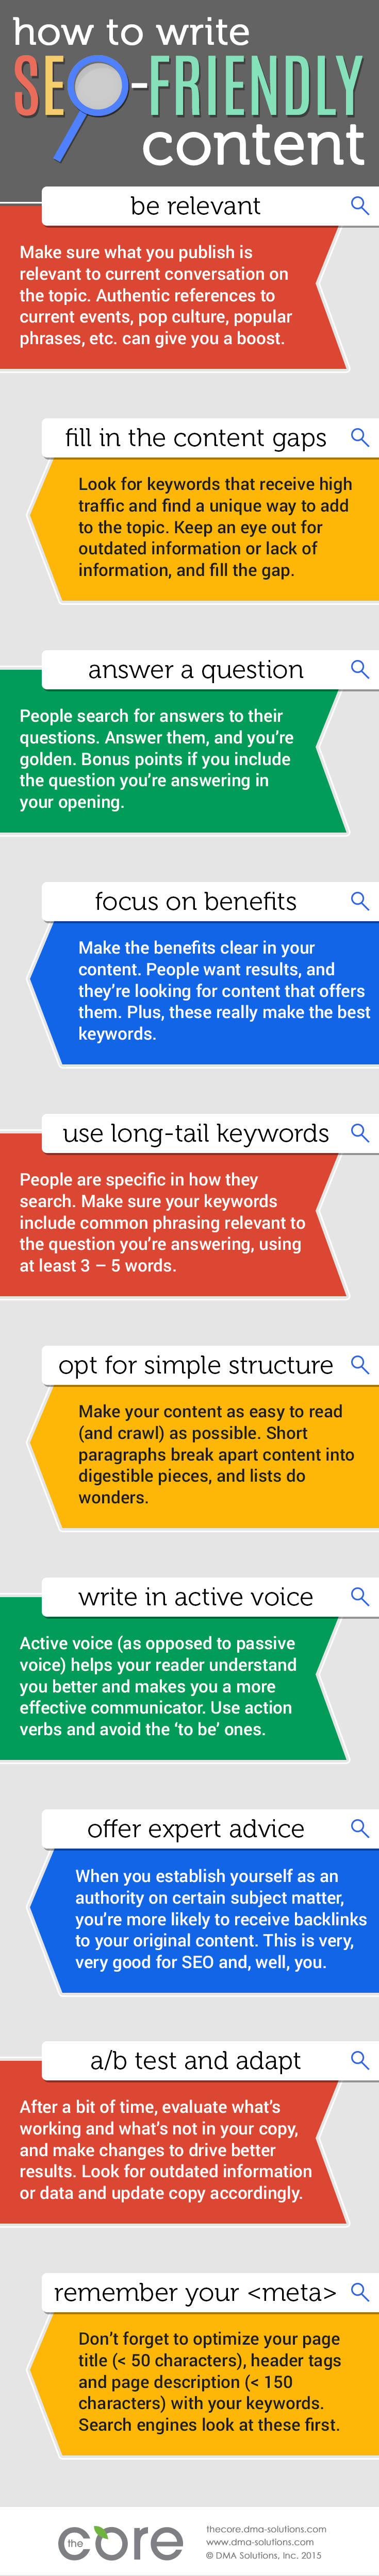 Infographic_How-to-Write-SEO-Friendly-Content